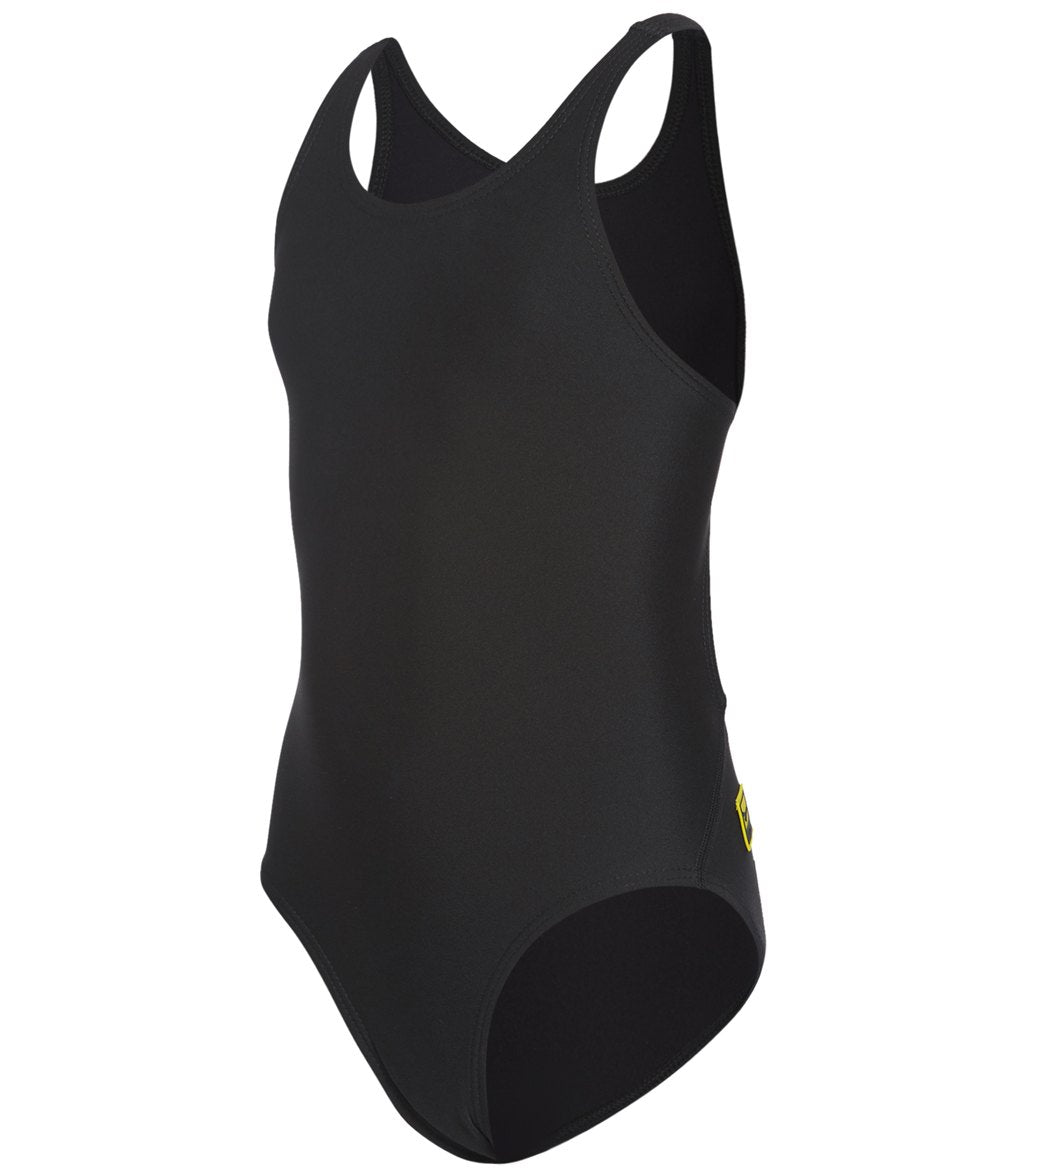 Finis Girls' Bladeback Solid One Piece Swimsuit - Black 20 - Swimoutlet.com